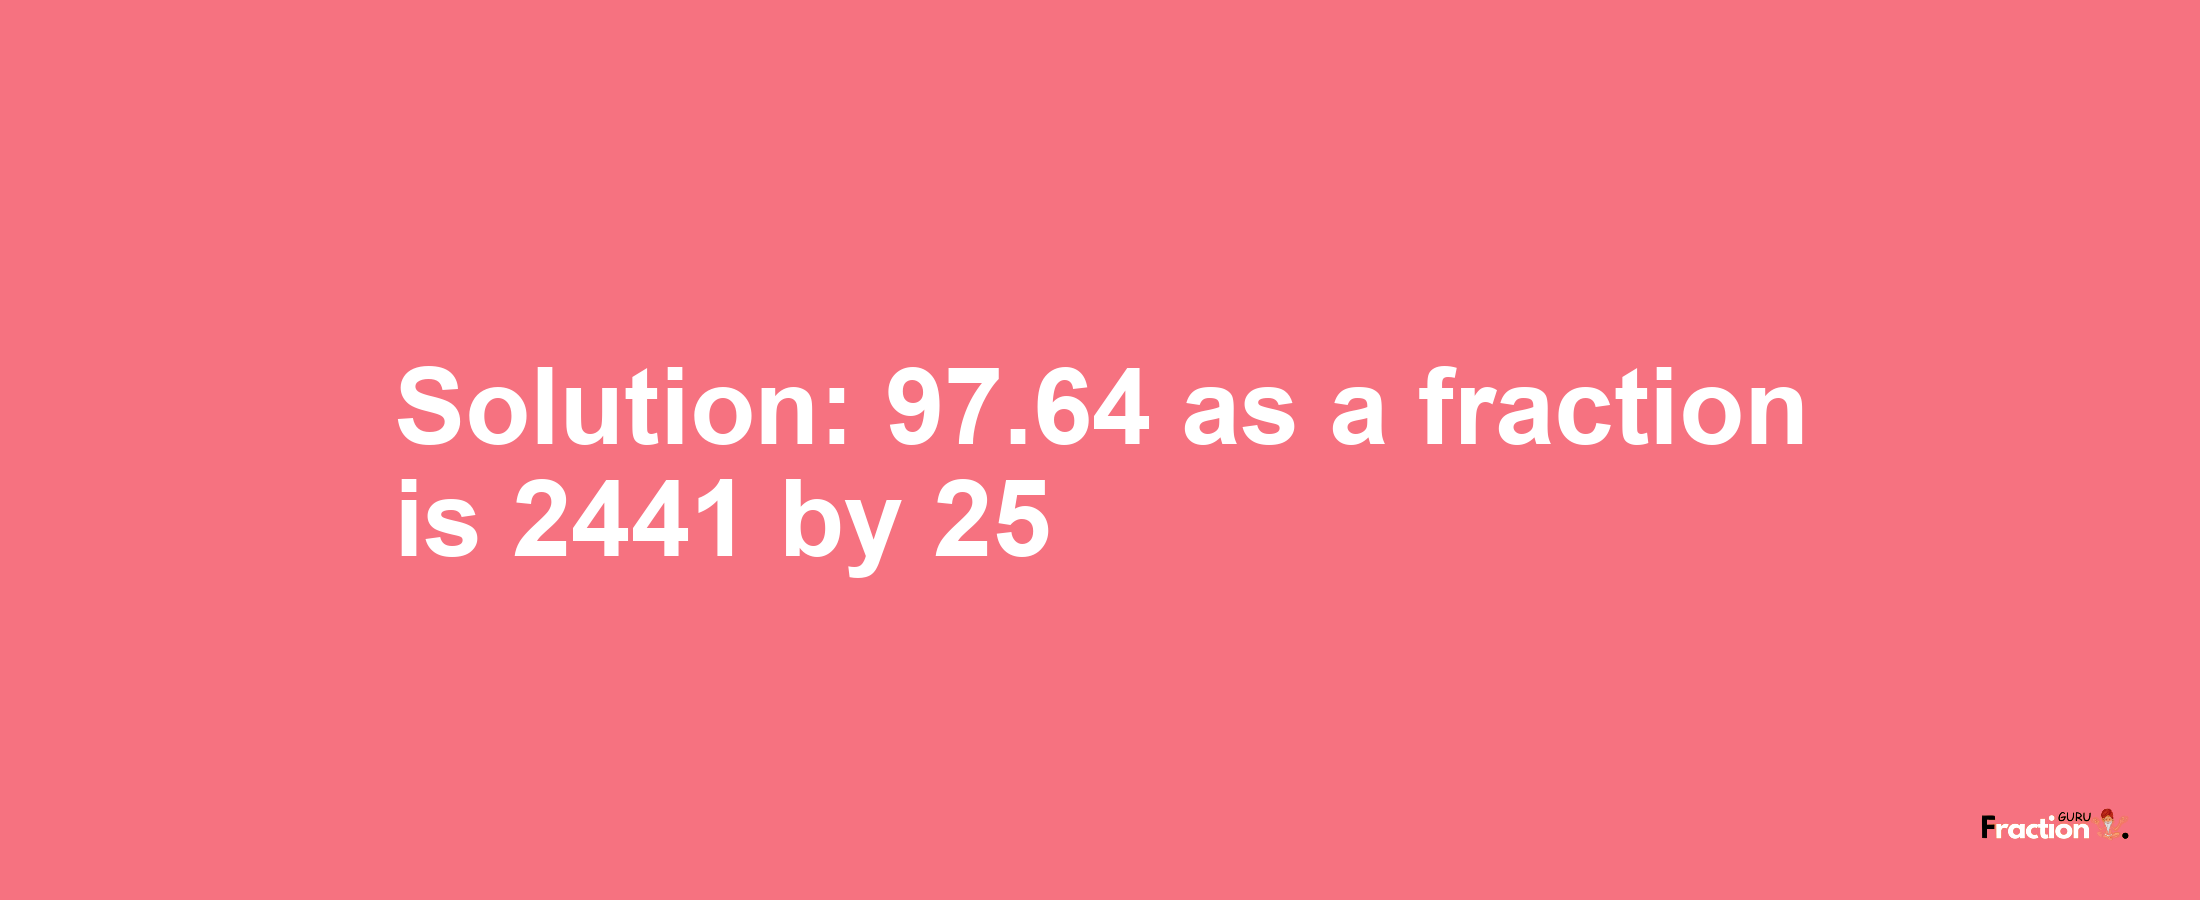 Solution:97.64 as a fraction is 2441/25